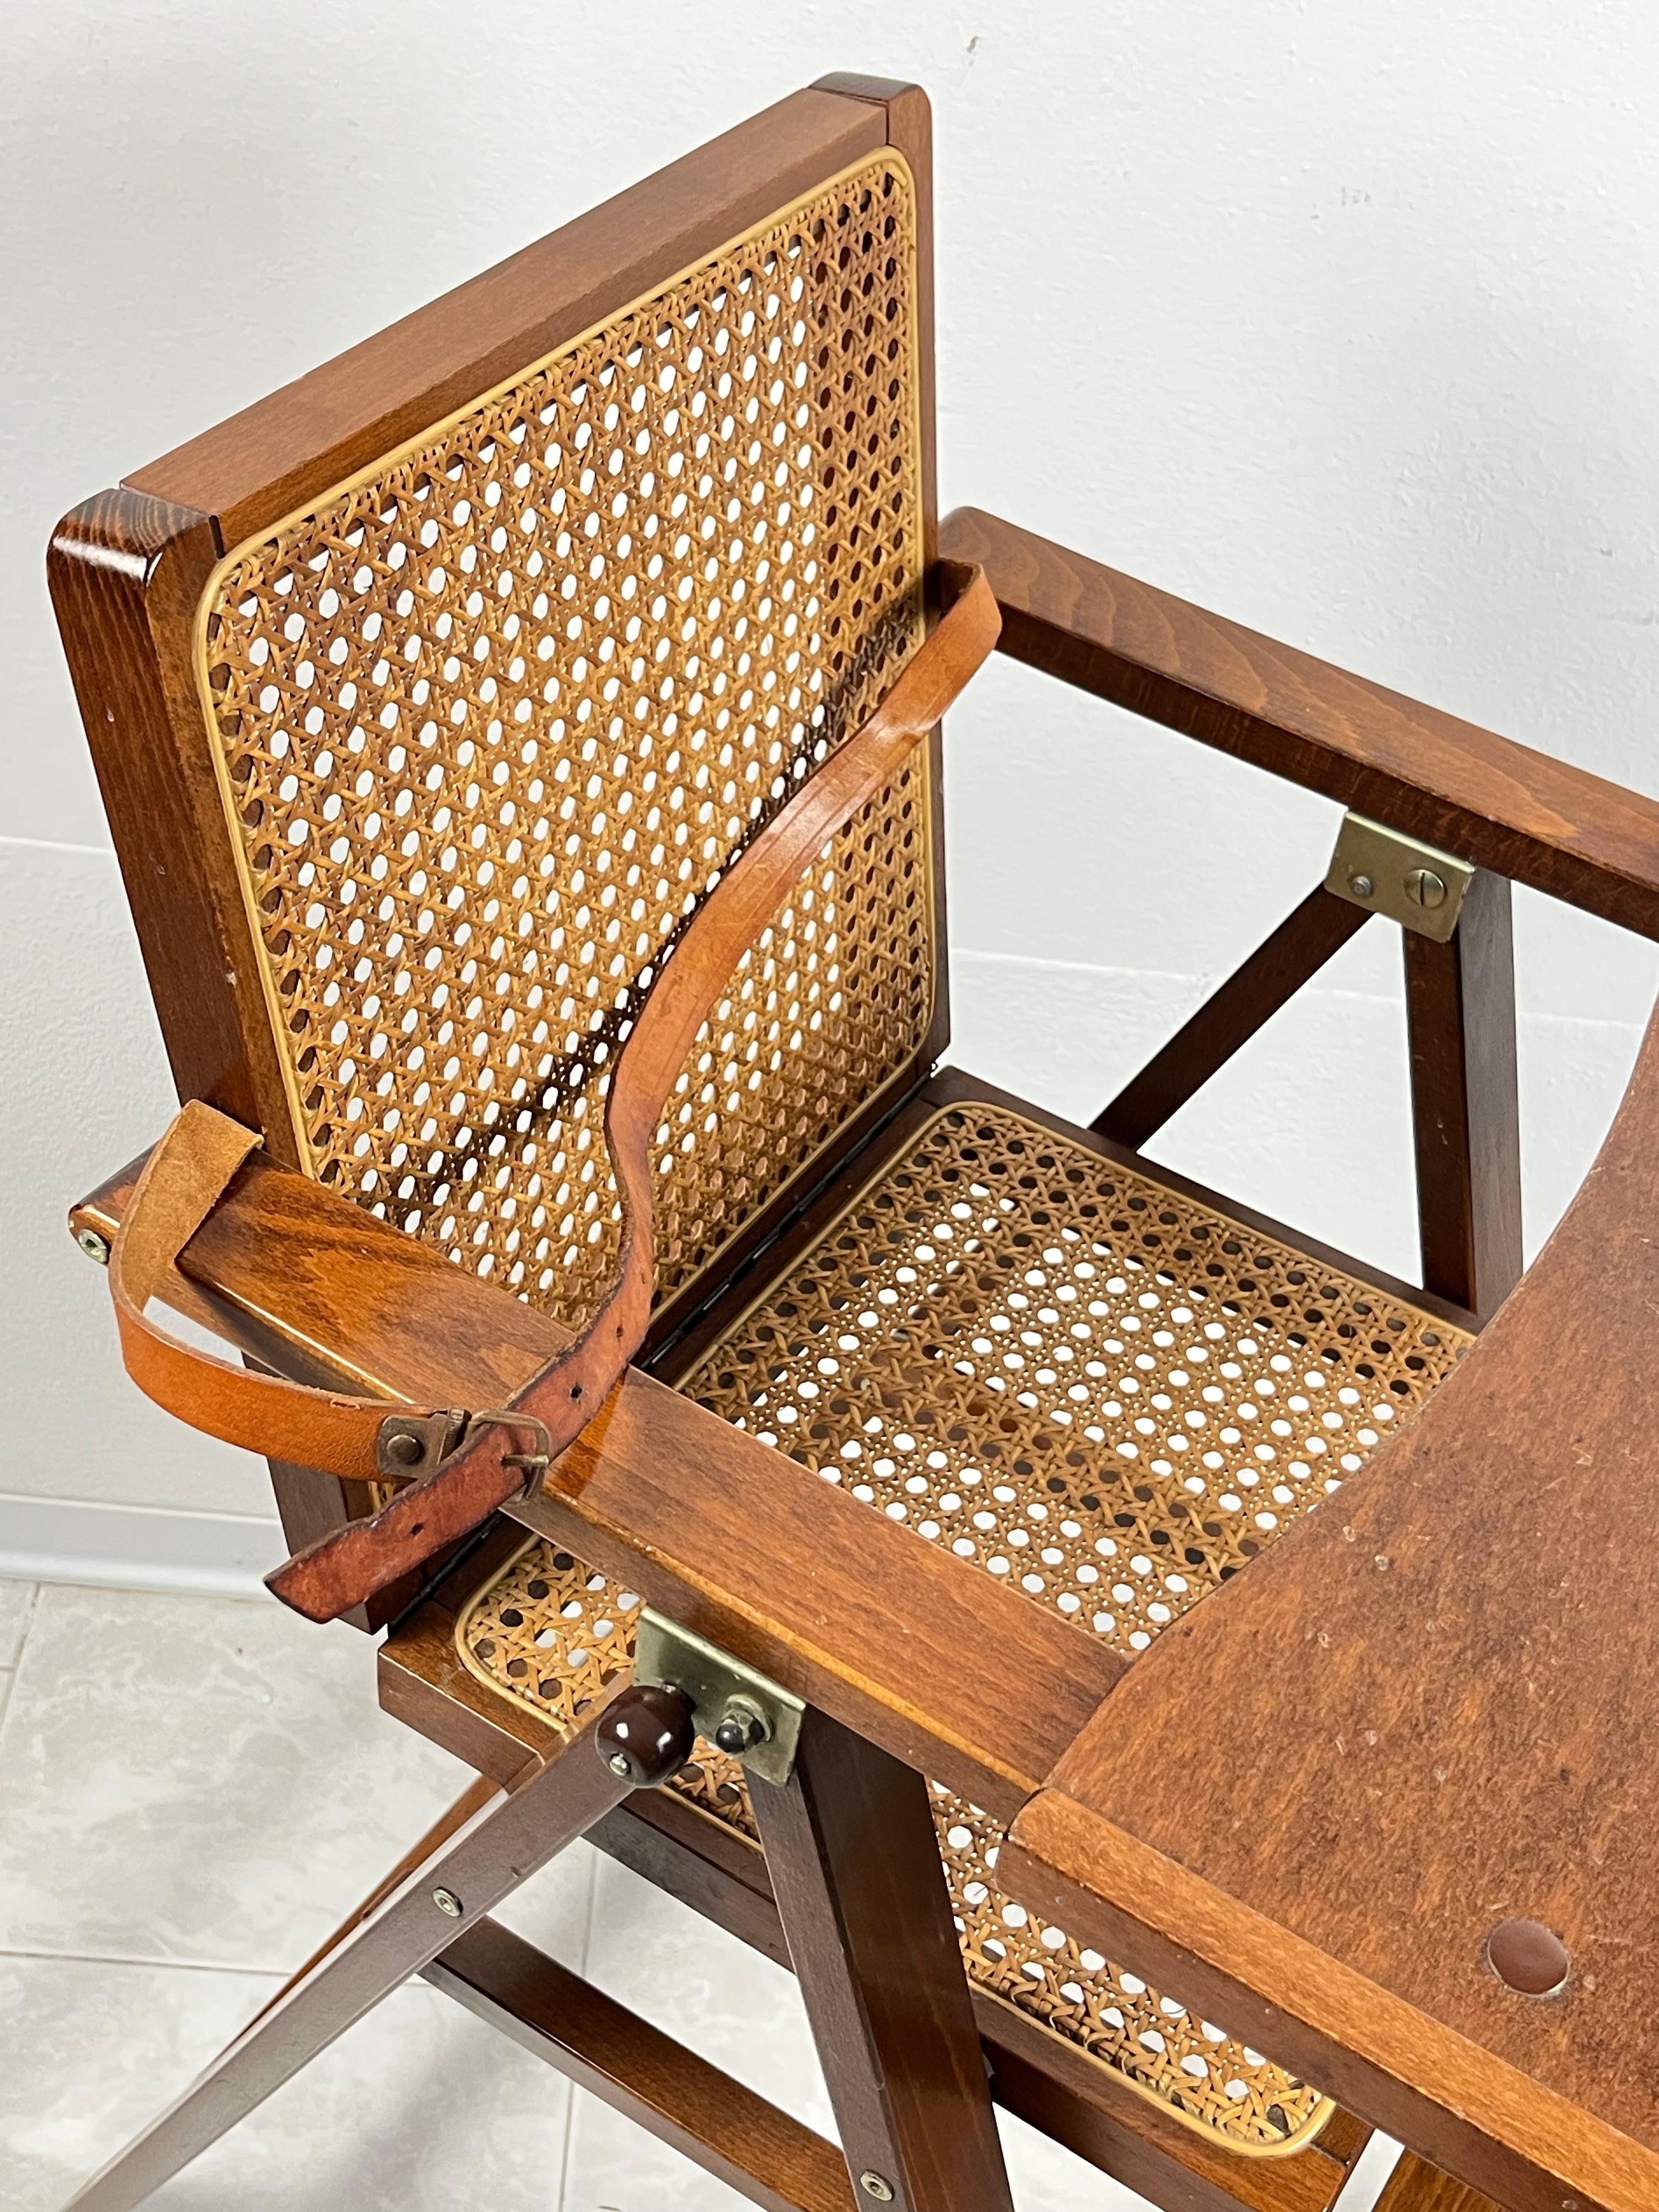 Italian High Chair For Baby Food, Italy, 1960s For Sale